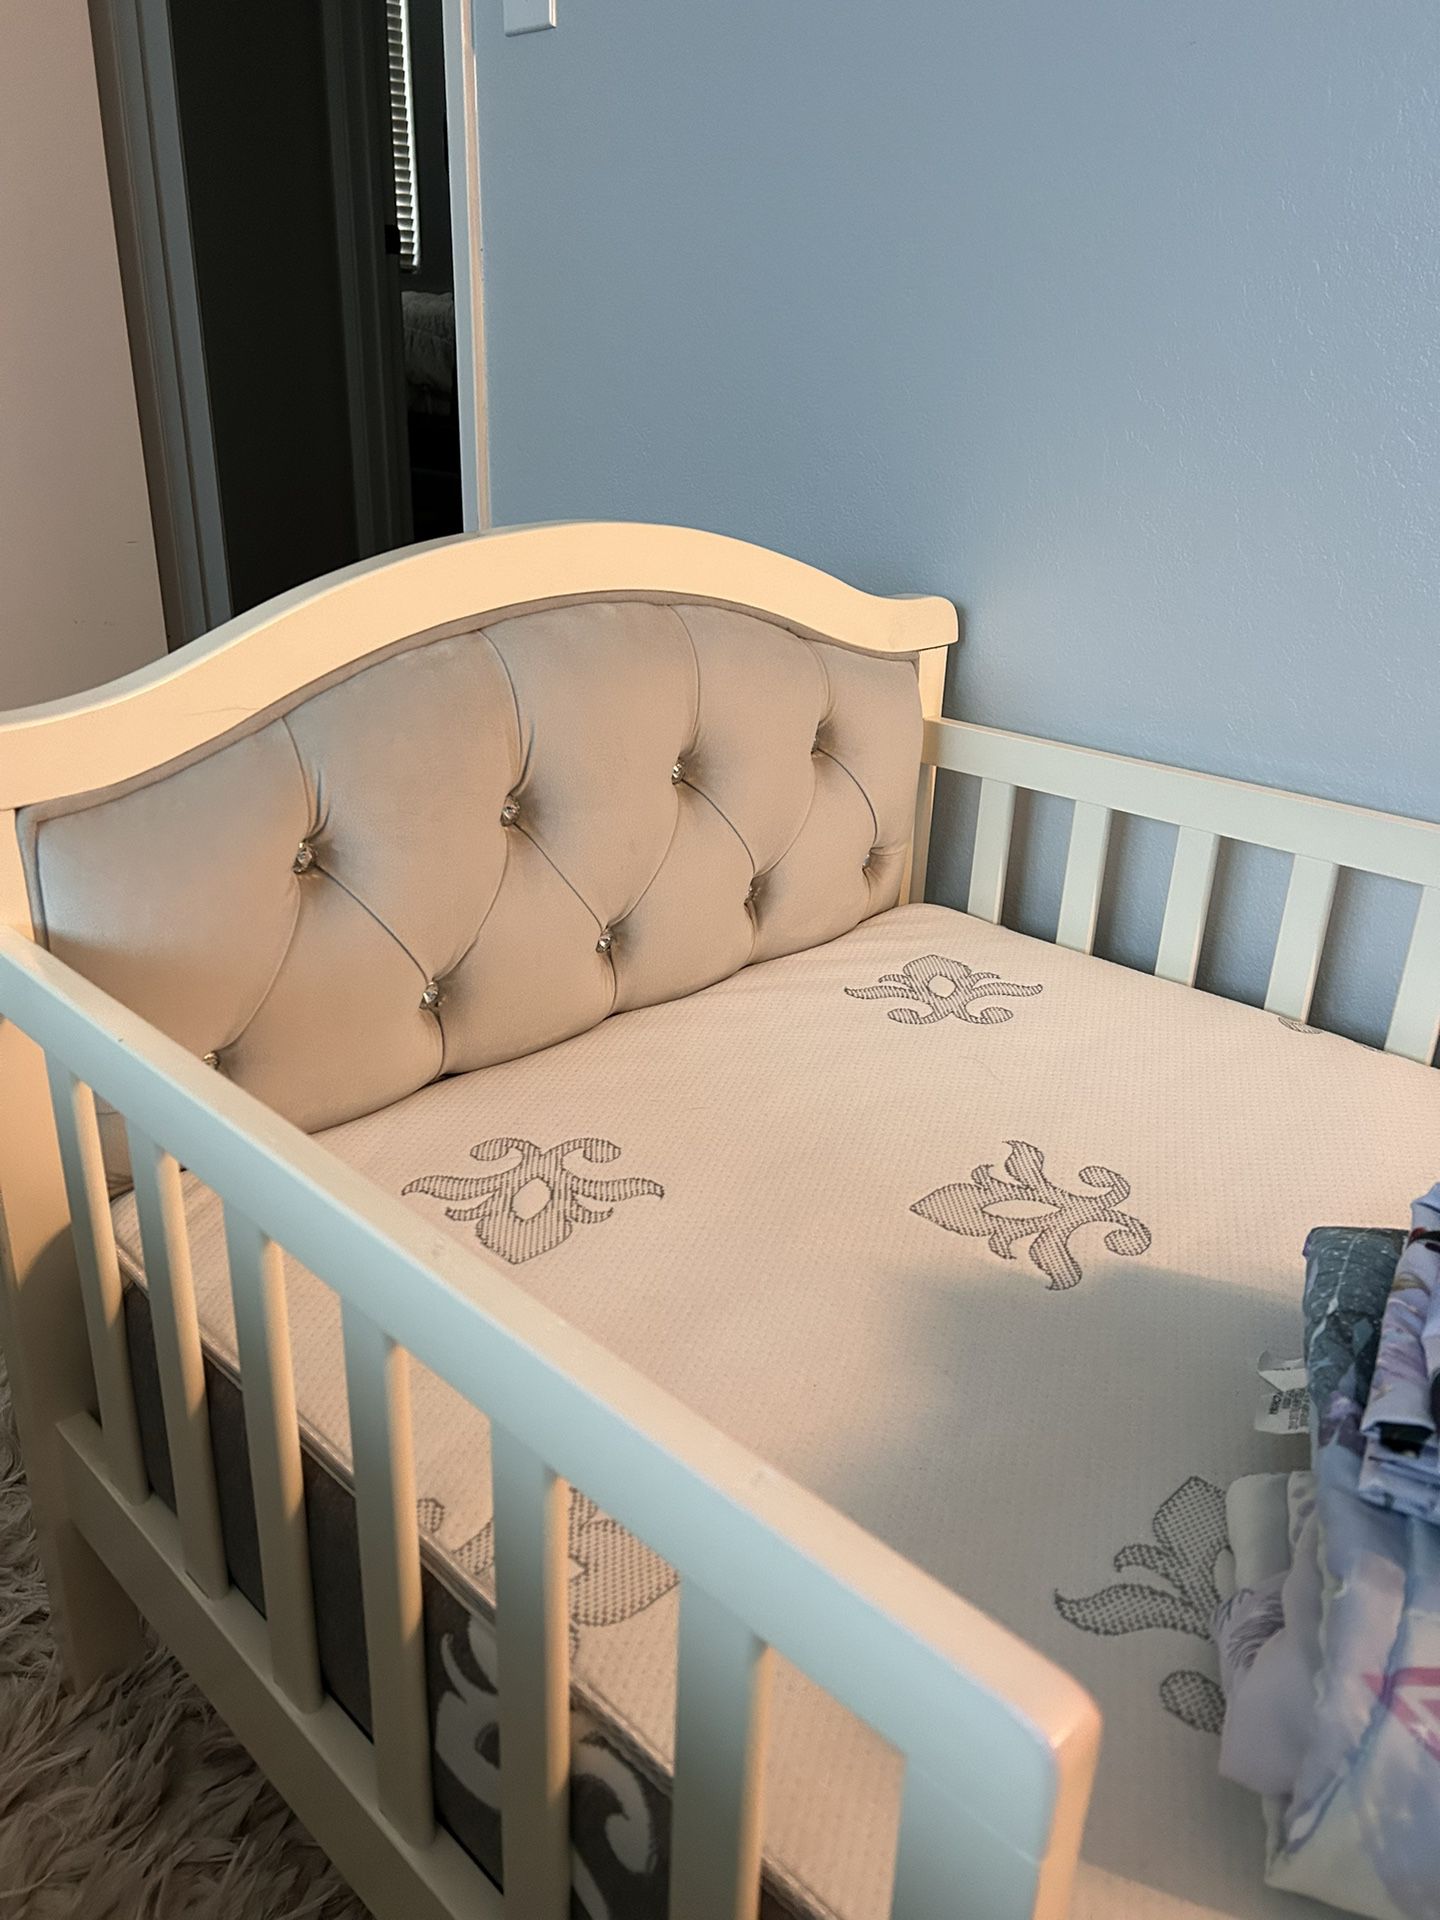 Toddler Bed And Mattress